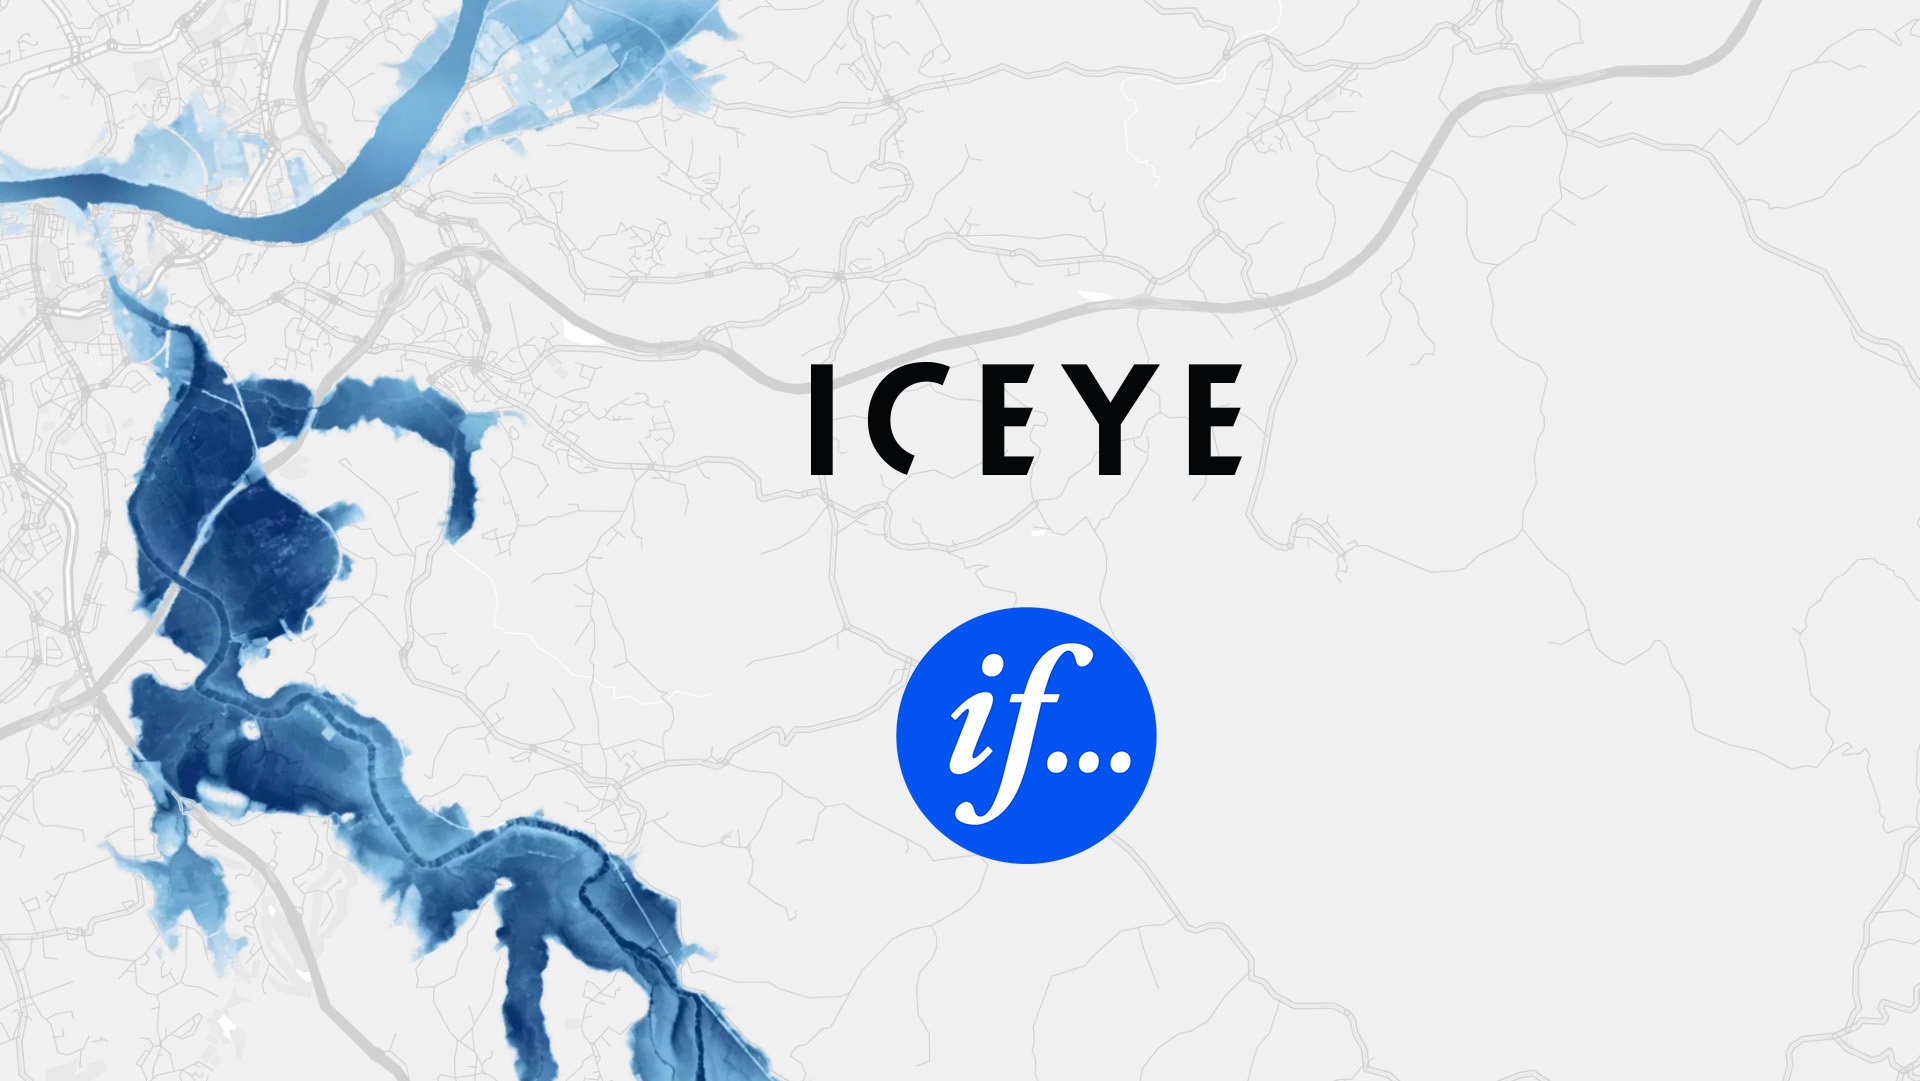 ICEYE and If P&C Insurance logos on top of ICEYE's flood visualization.